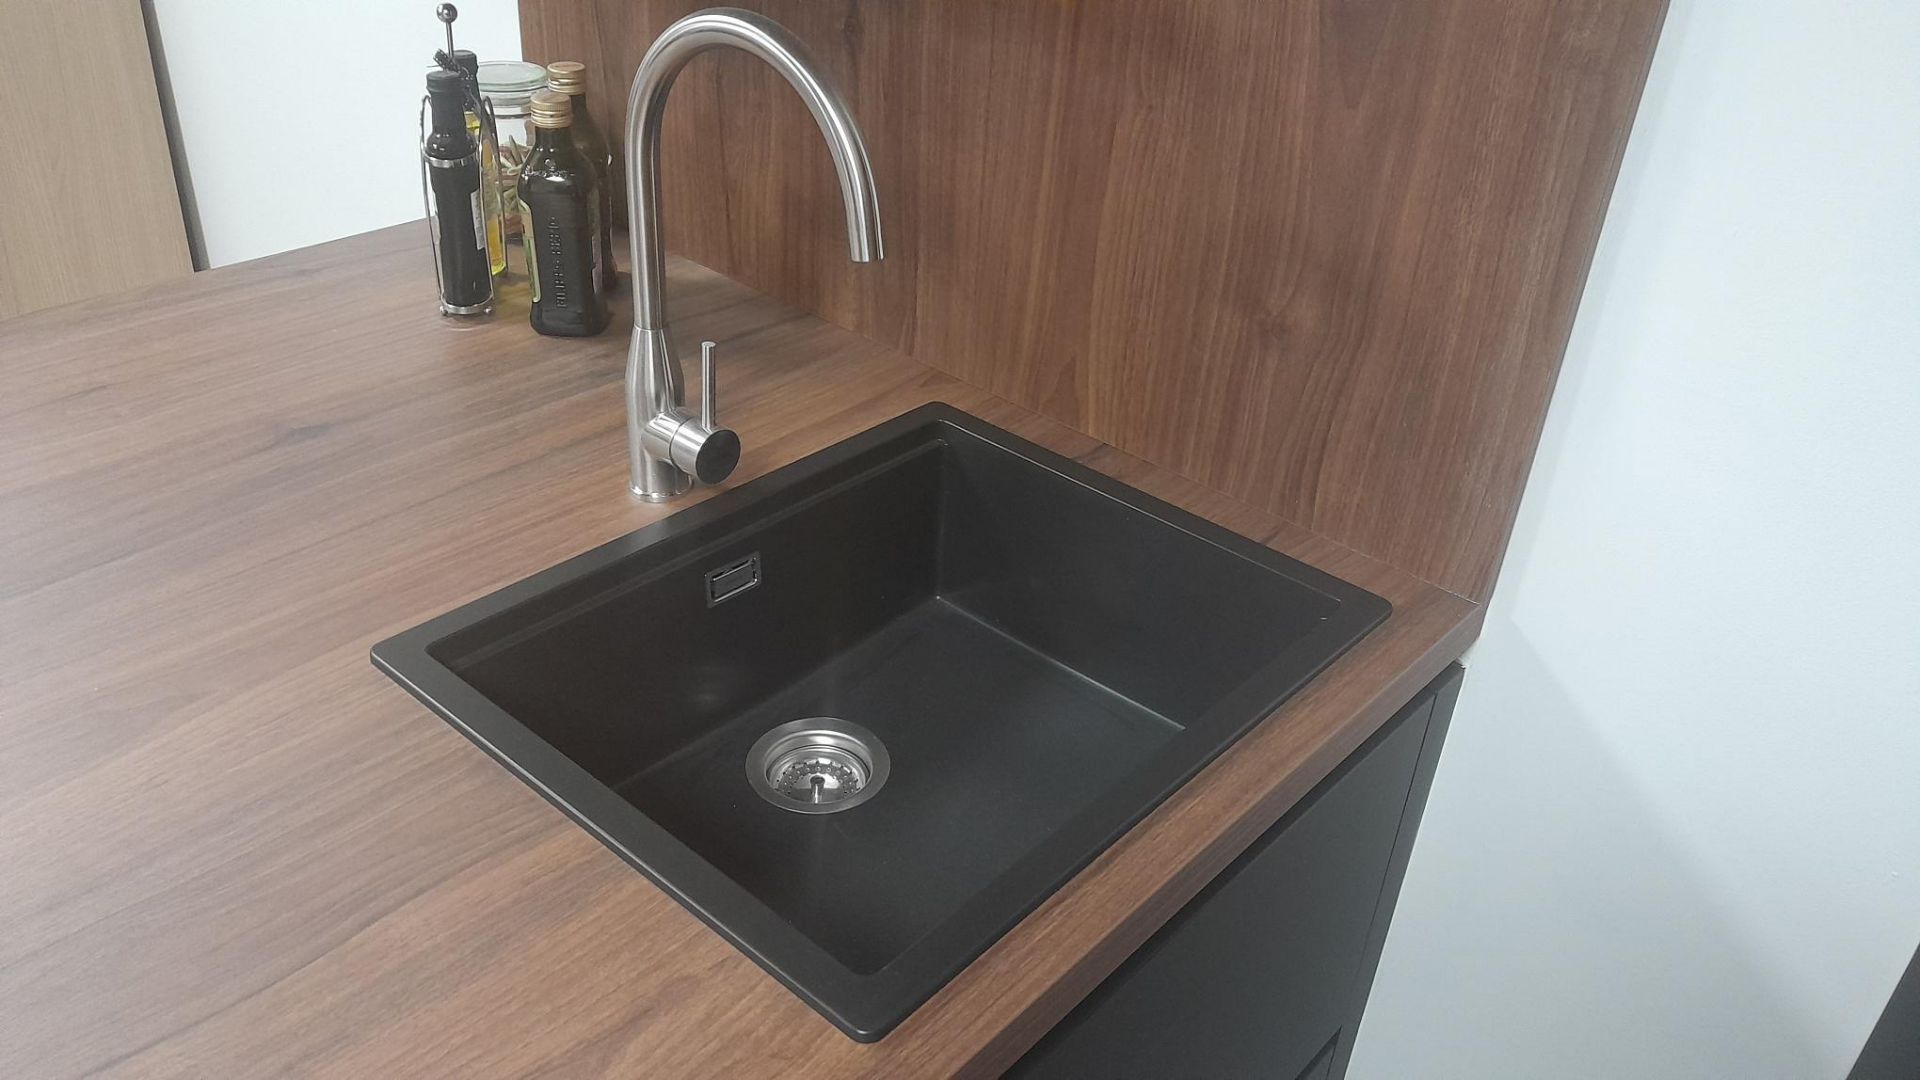 Hacker Top Soft Black and Walnut handleless ex display kitchen, with Schock undermount sink and tap. - Image 5 of 7